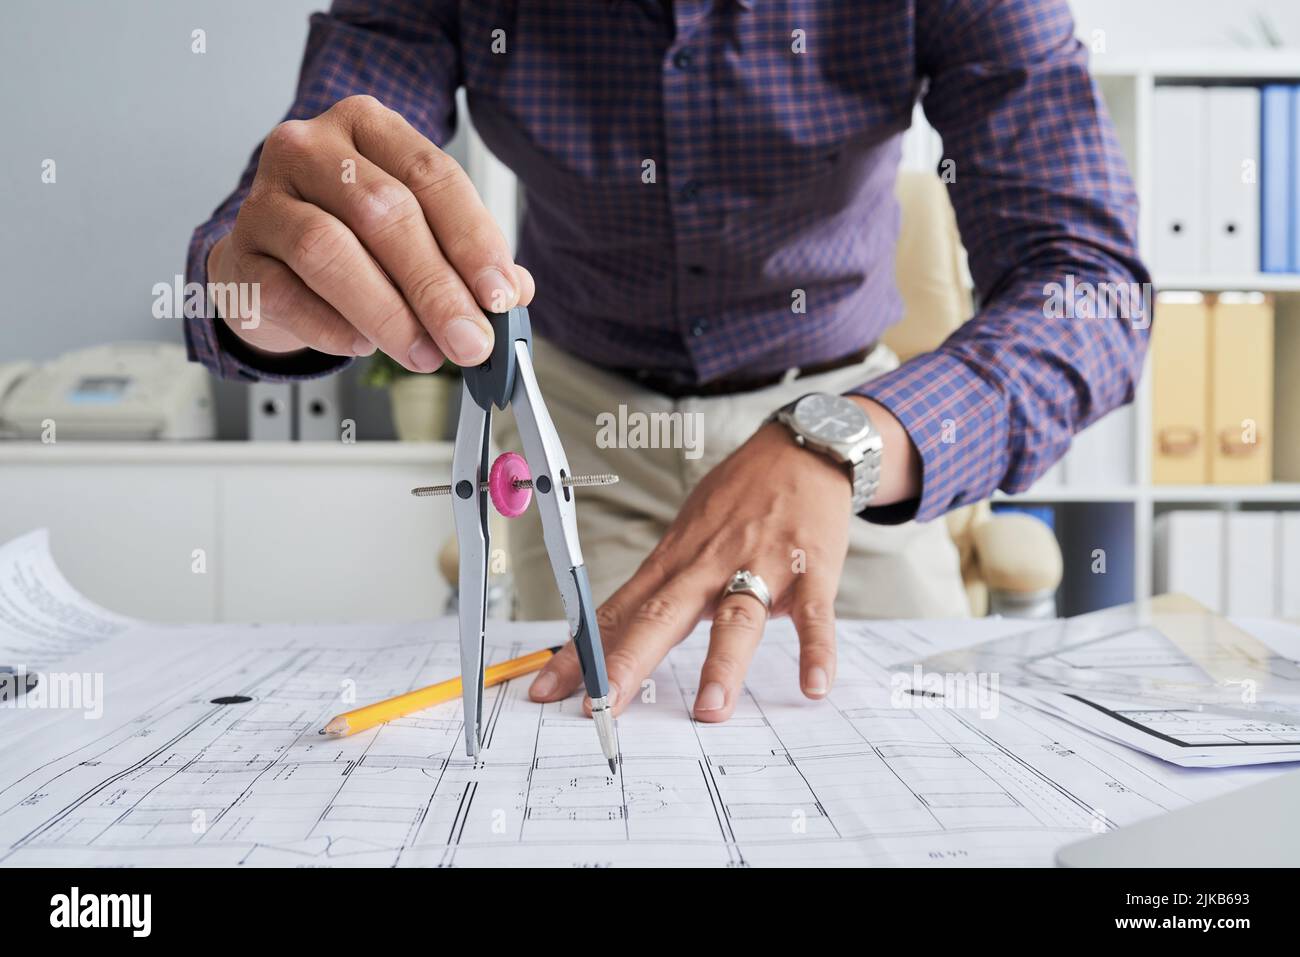 Close-up image of architect using compasses when drawing blueprint Stock Photo